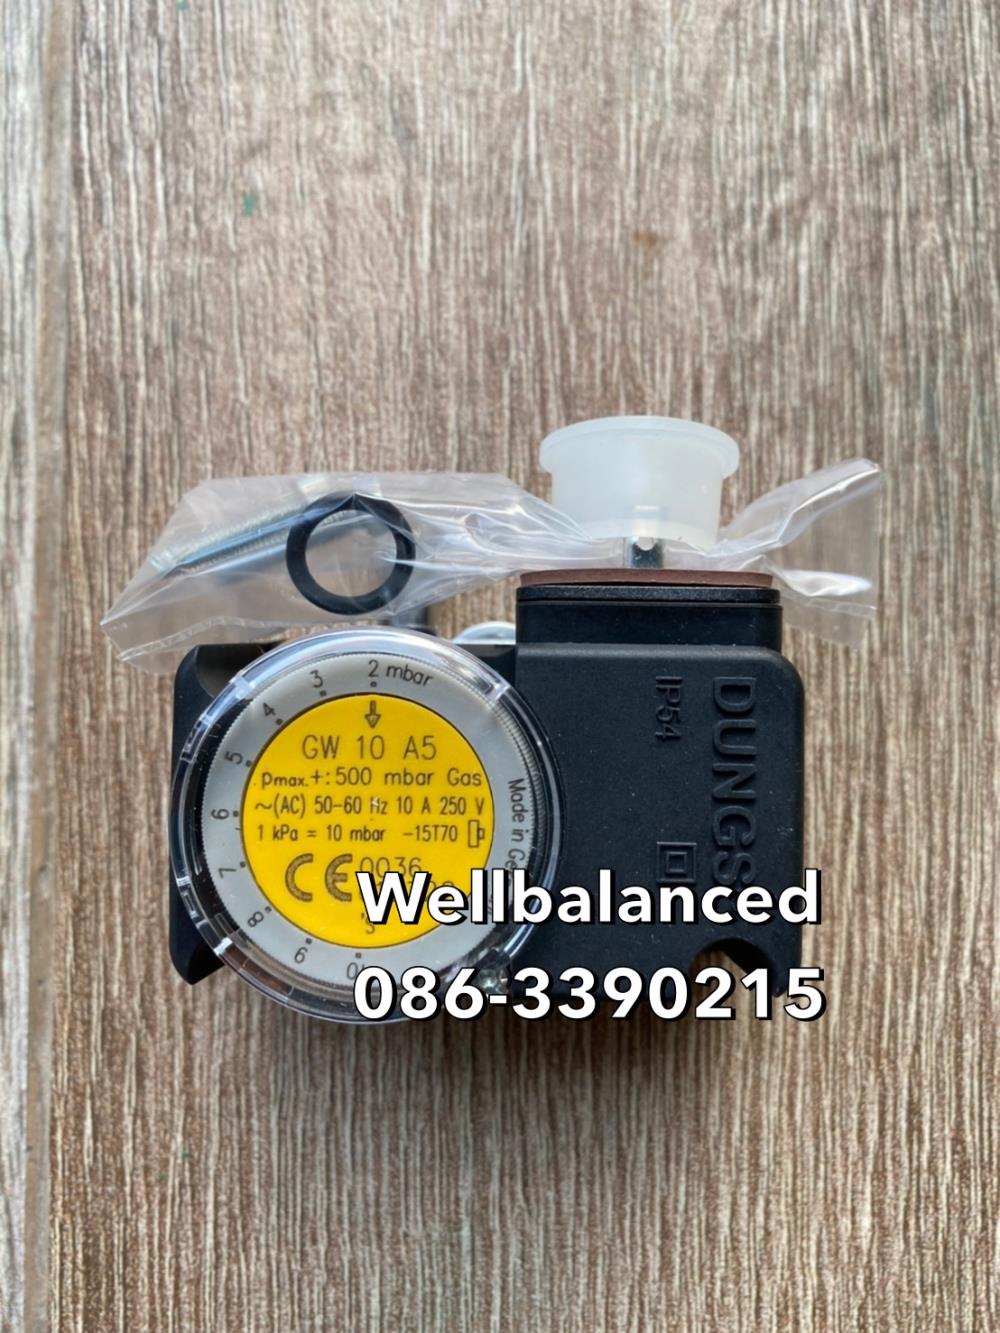 " DUNGS " Pressure Switch Model : GW 10 A5," DUNGS " Pressure Switch Model : GW 10 A5," DUNGS " Pressure Switch Model : GW 10 A5,Instruments and Controls/Switches